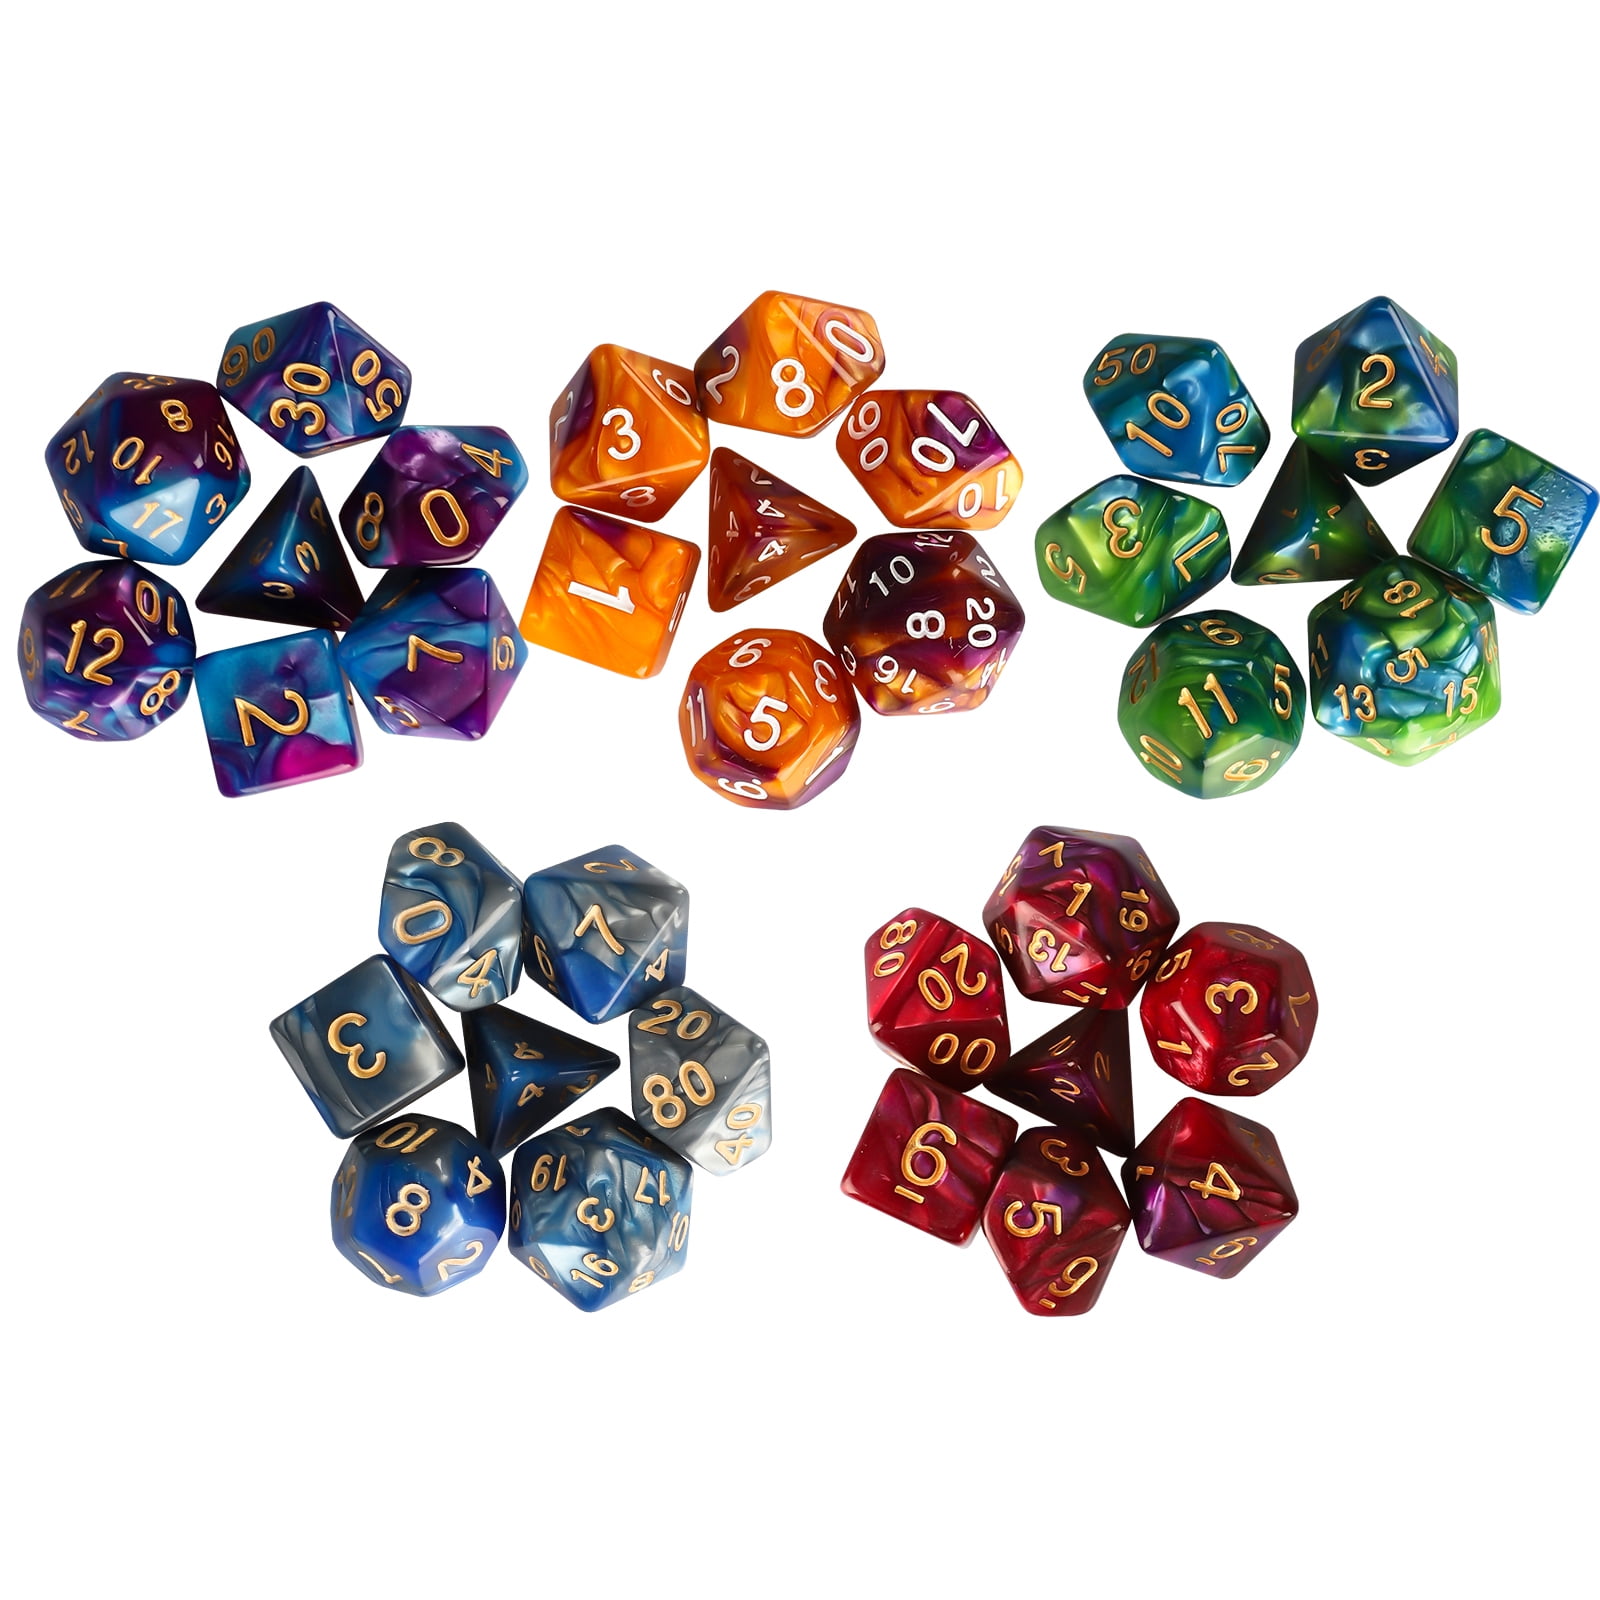 Green White 1 Set Polyhedral Dice Set Polyhedral 7-Die Dice Set Dice Set Polyhedral Game Dice Set of D4 D6 D8 D10 D% D12 D20 Compatible with Table Card Games